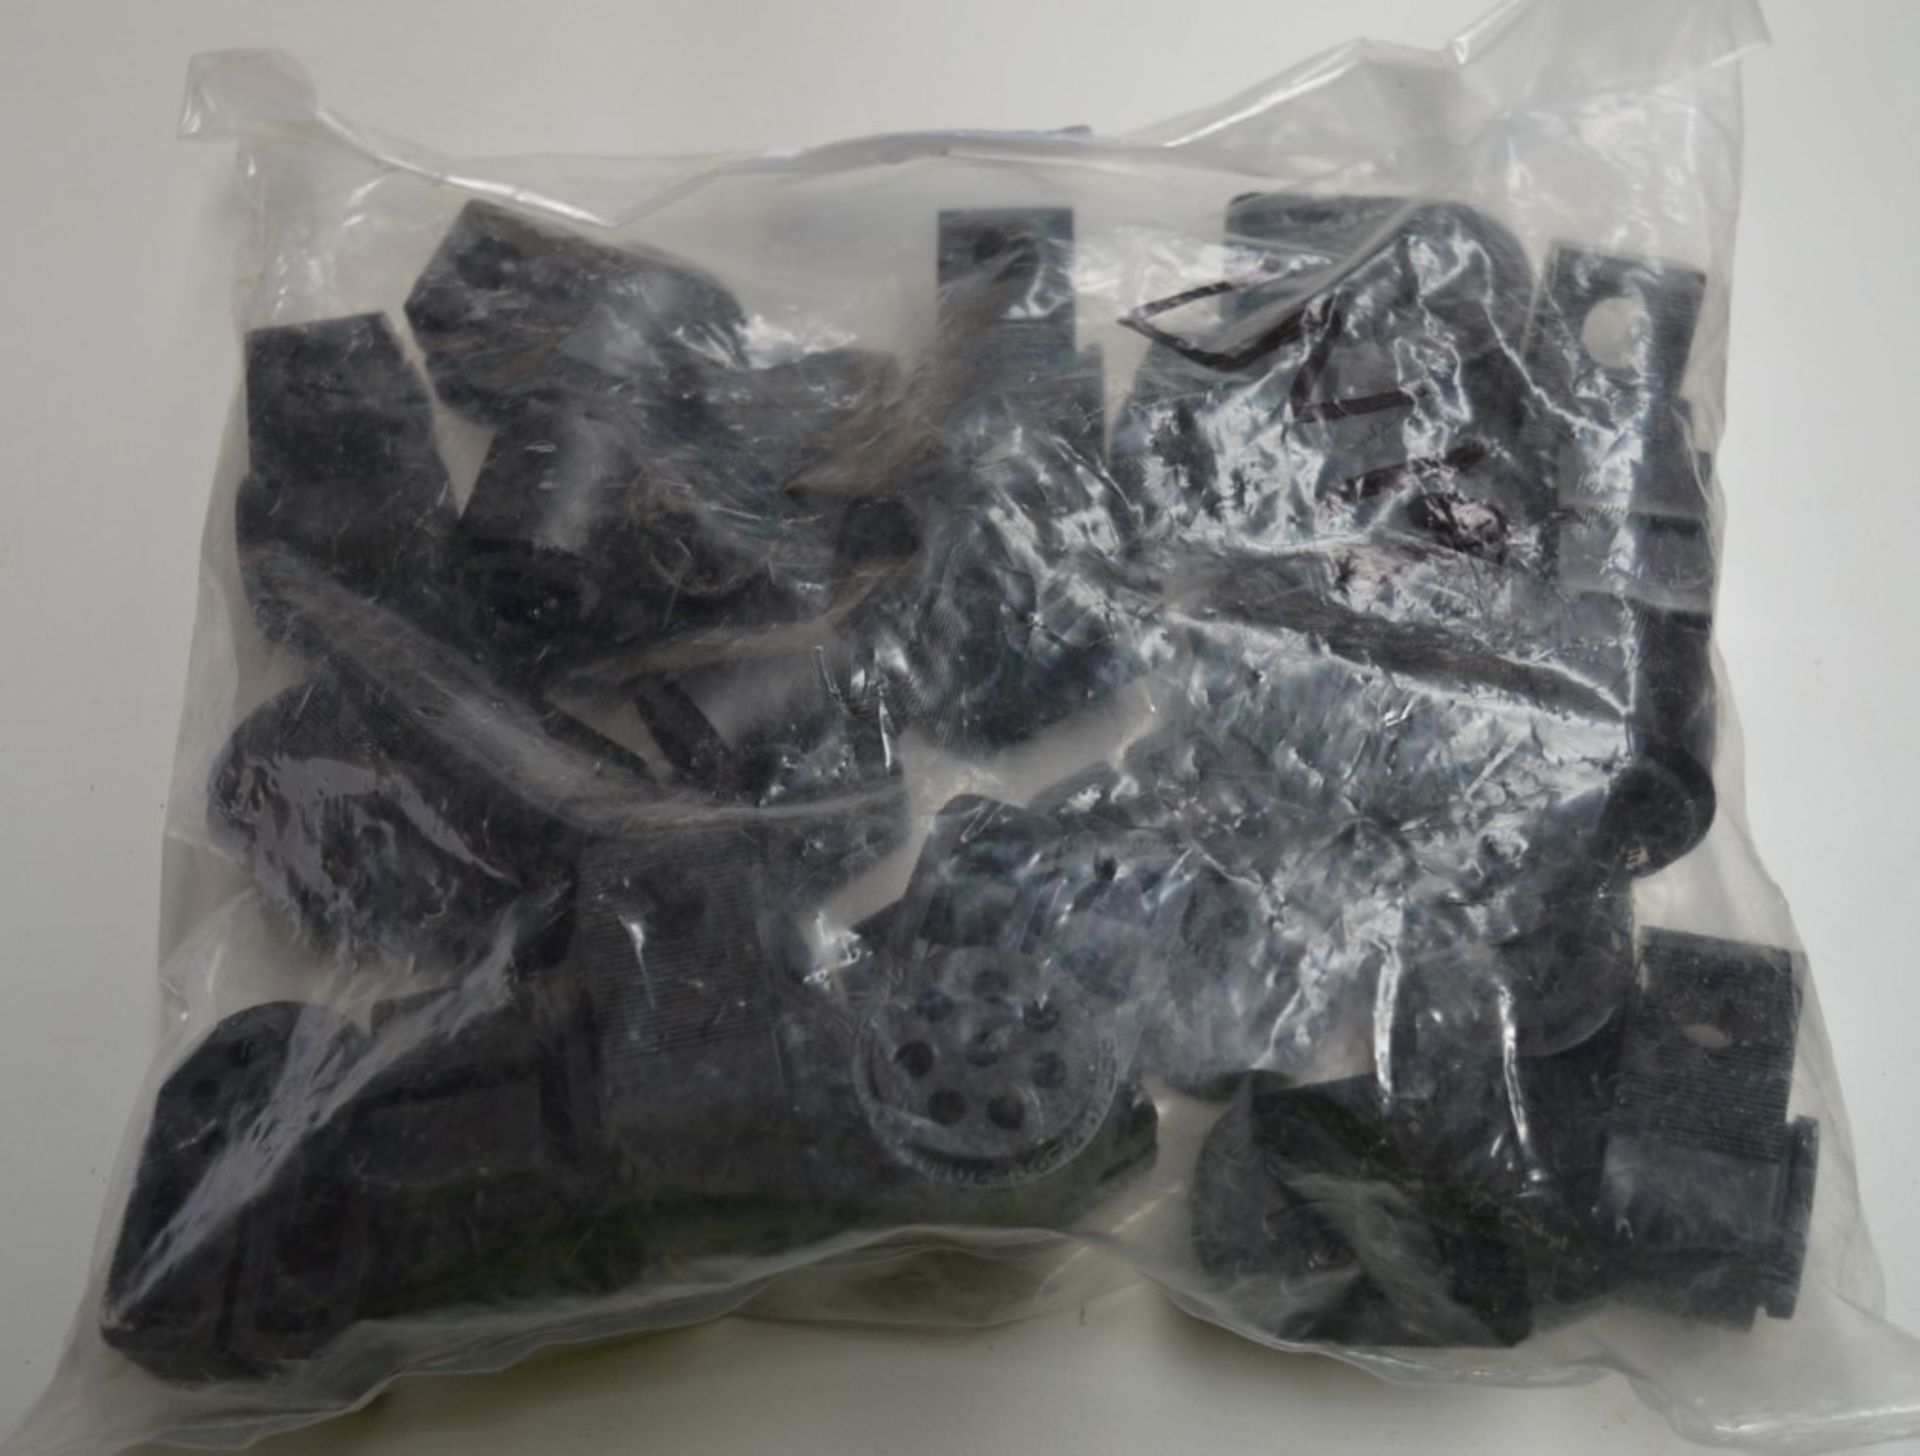 50 x Black Cleats With 8 x 4.8mm Hole Cable Bungs - Unused Bag of 25 - Type GCA BW1.2 HS8 - - Image 4 of 4